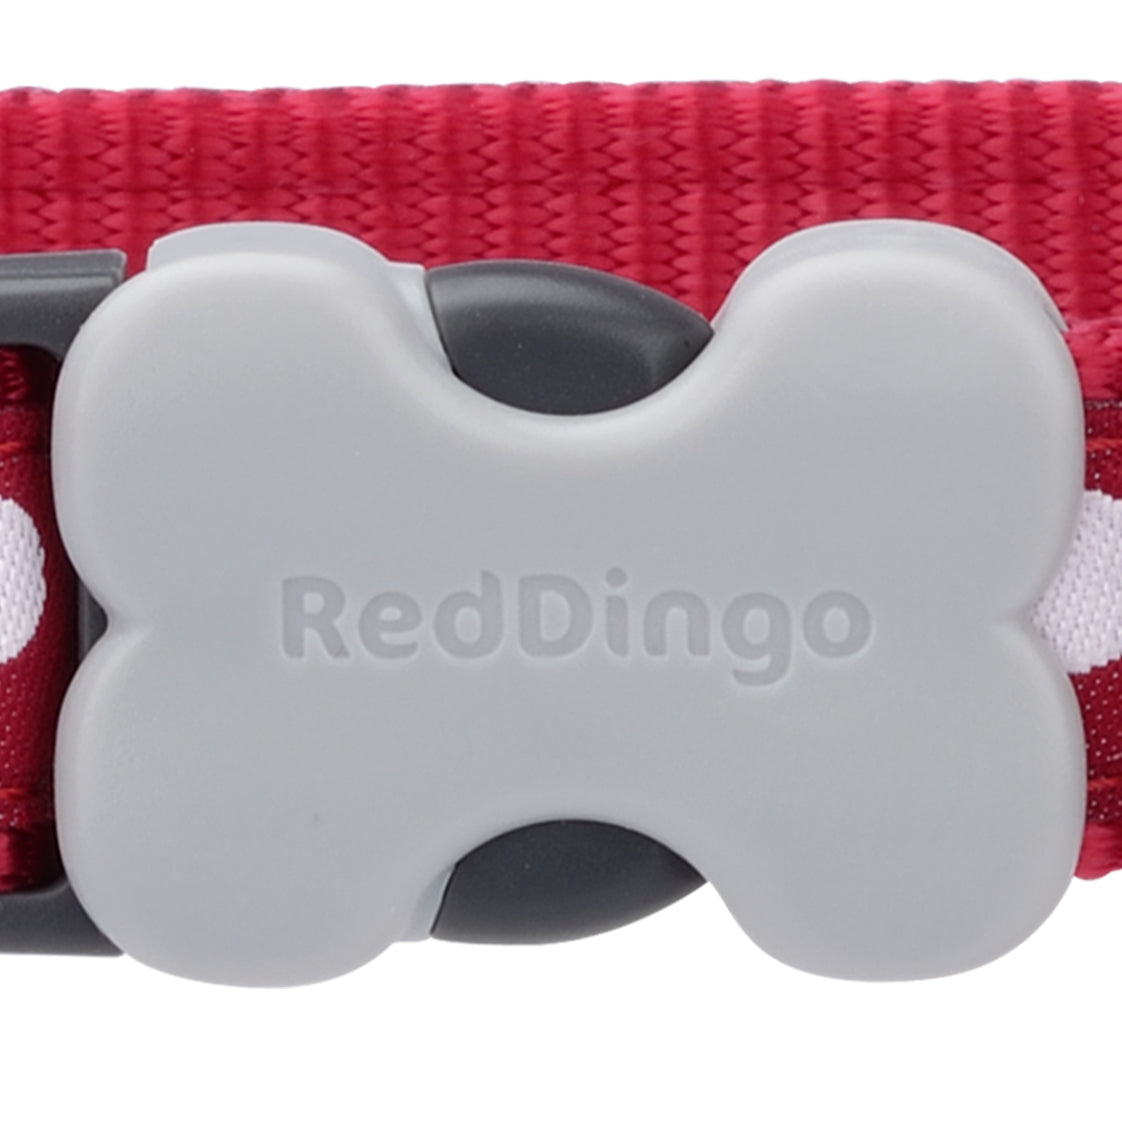 Red Dingo Spots Red Dog Collar